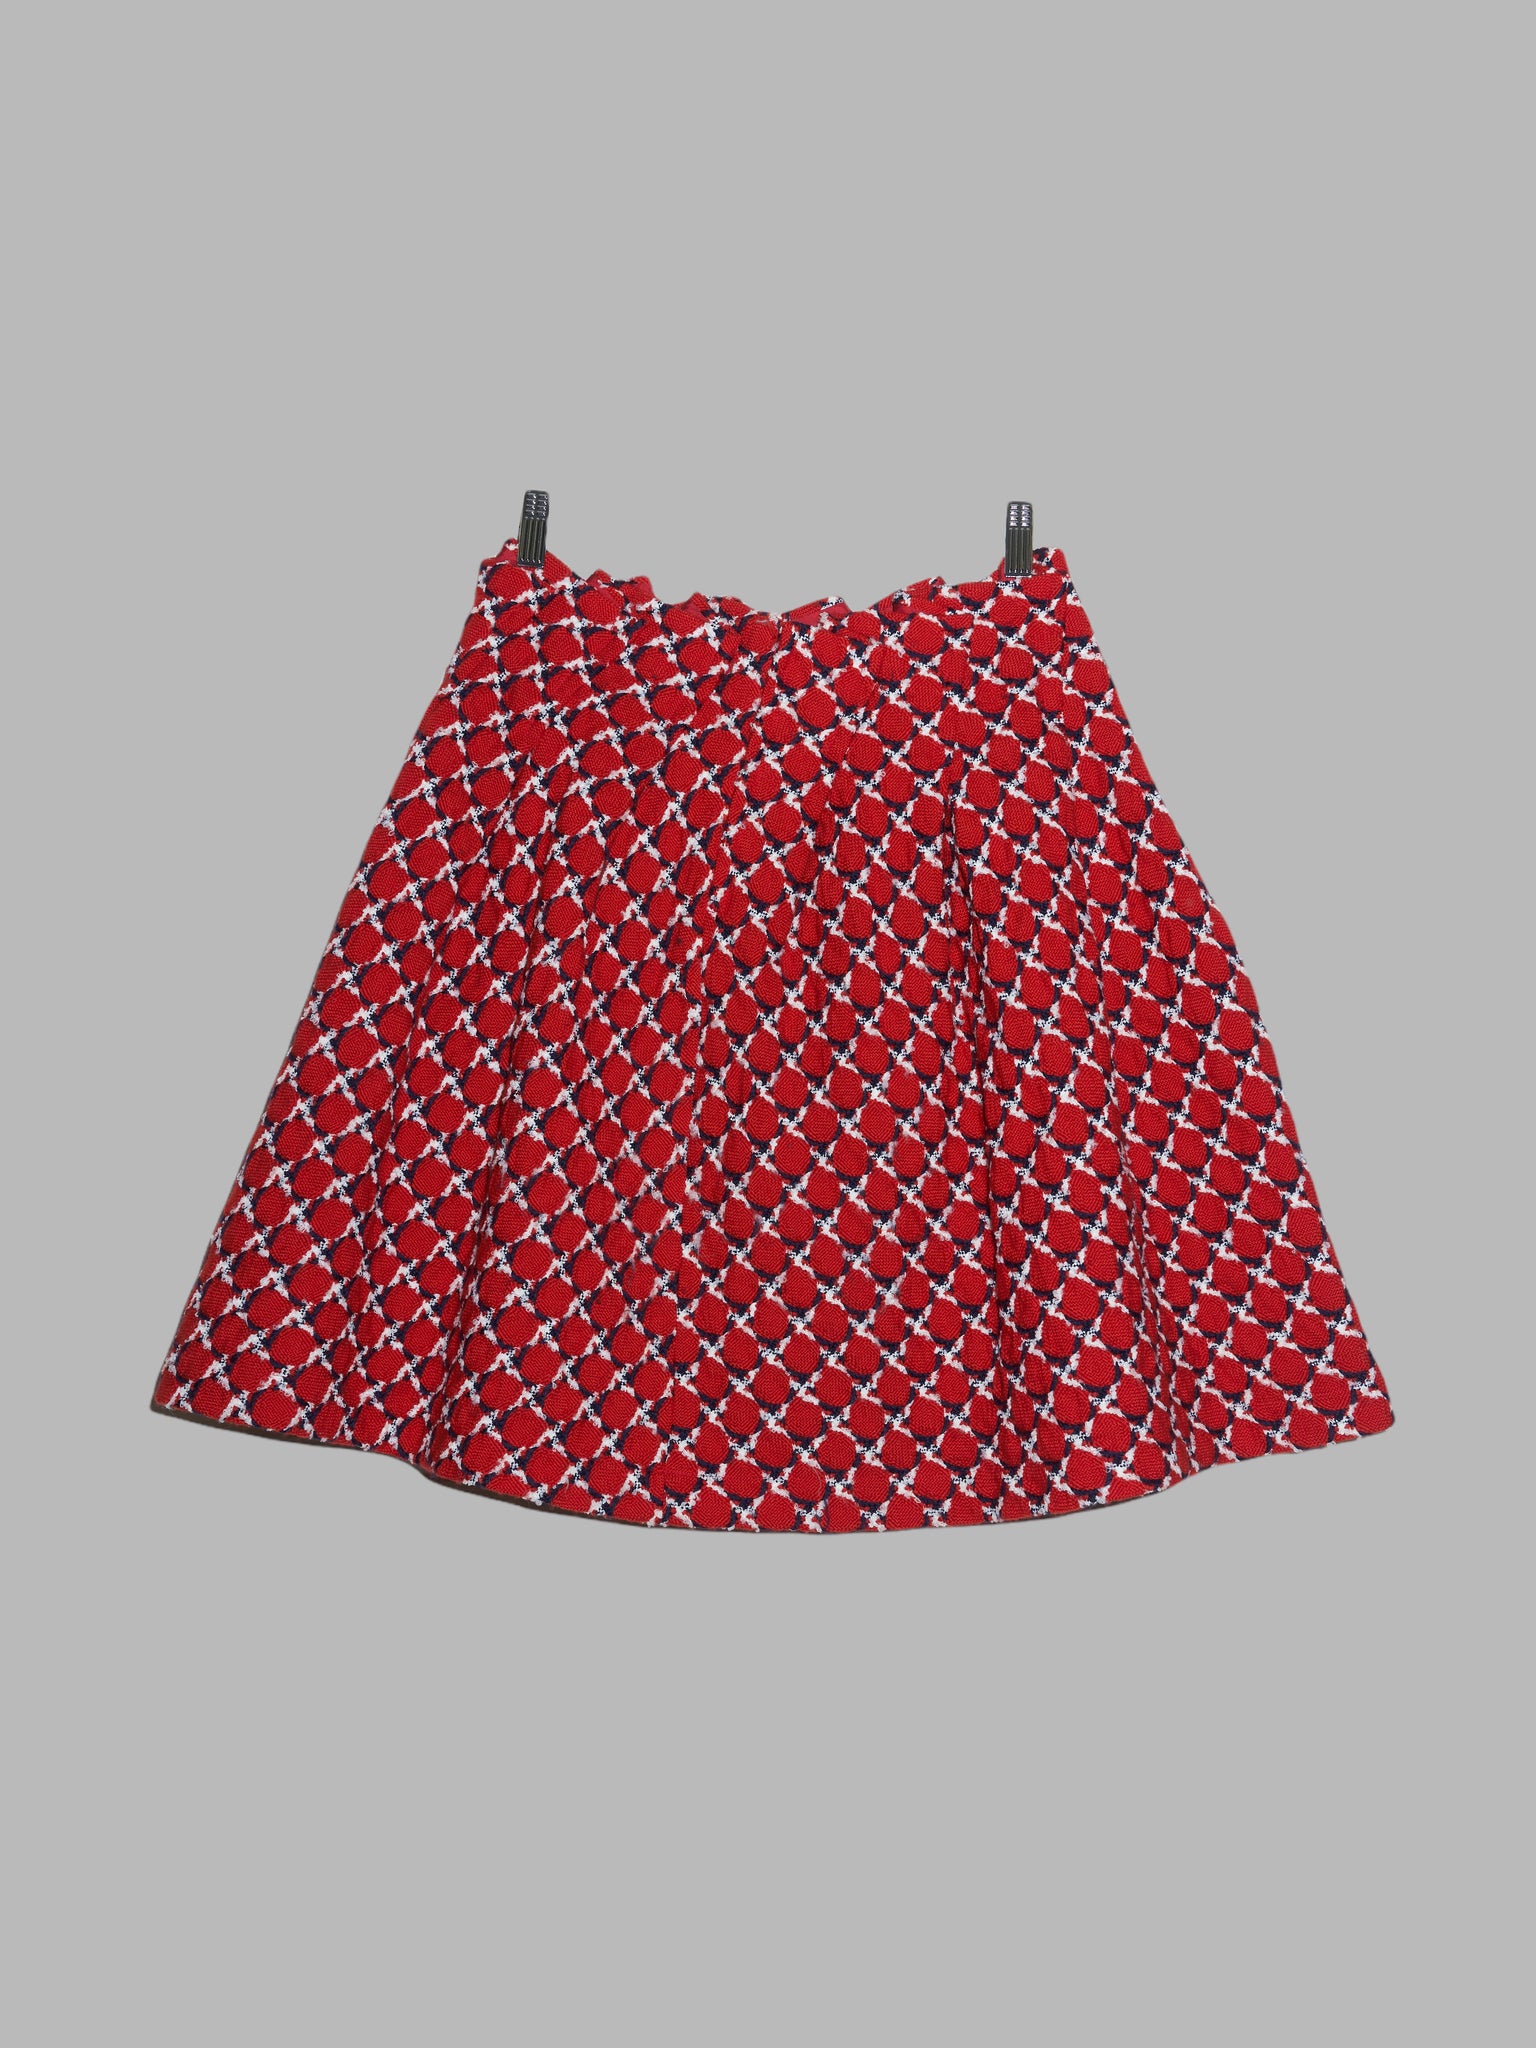 Junya Watanabe Comme des Garcons AW2001 red wool circle pattern pleated skirt M